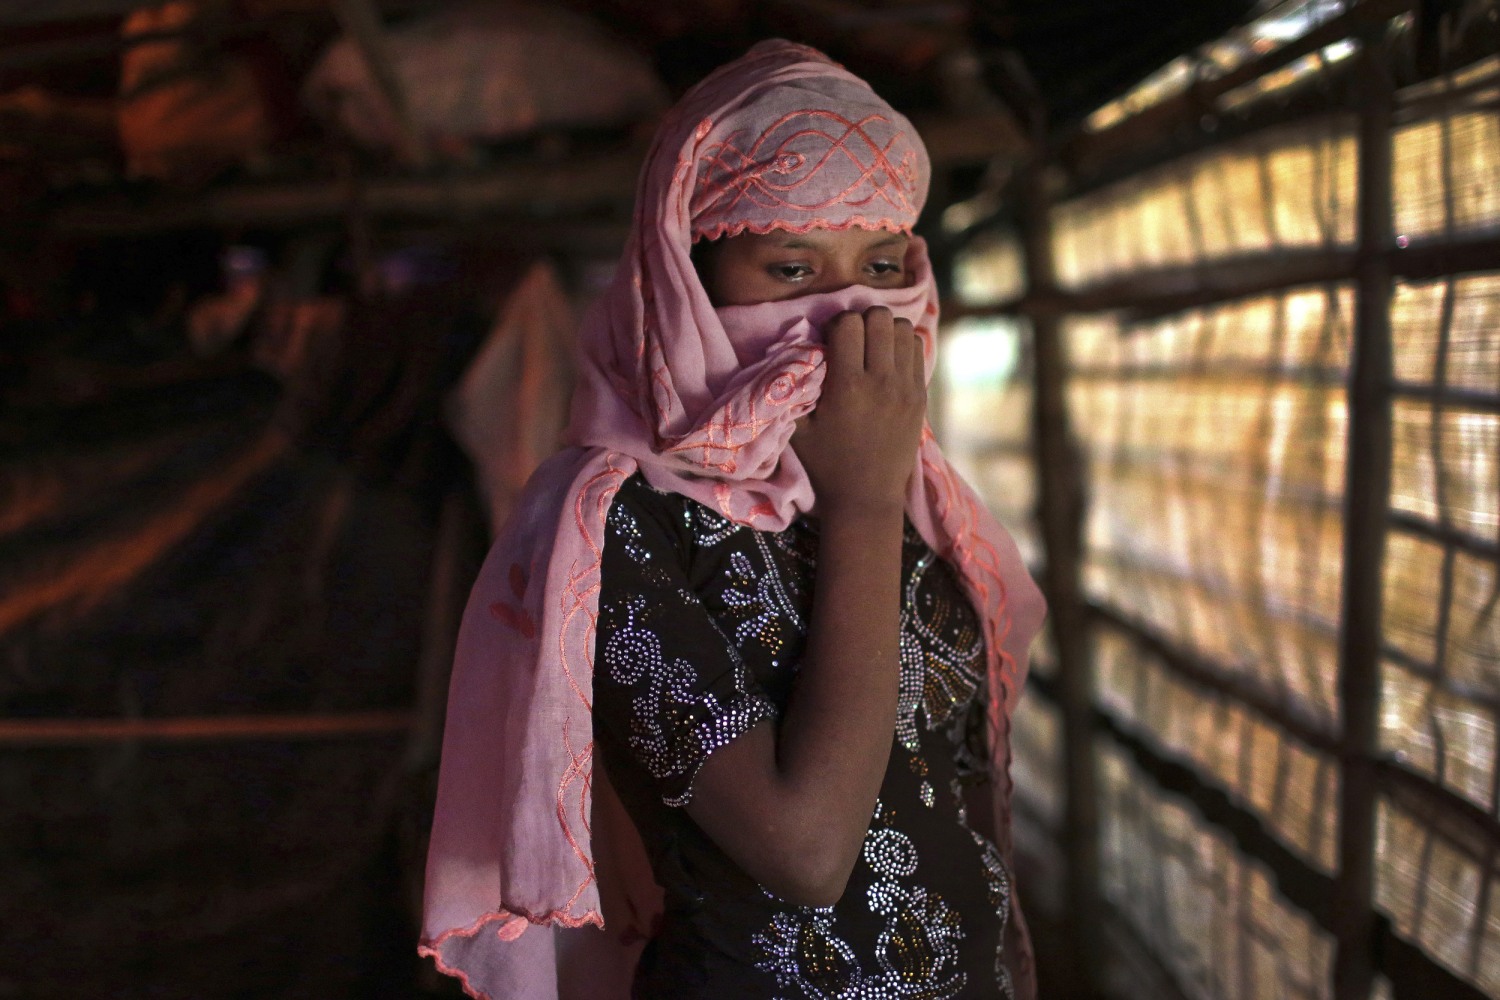 Three Boys Raped A Girl - 21 Rohingya women detail systemic, brutal rapes by Myanmar armed forces